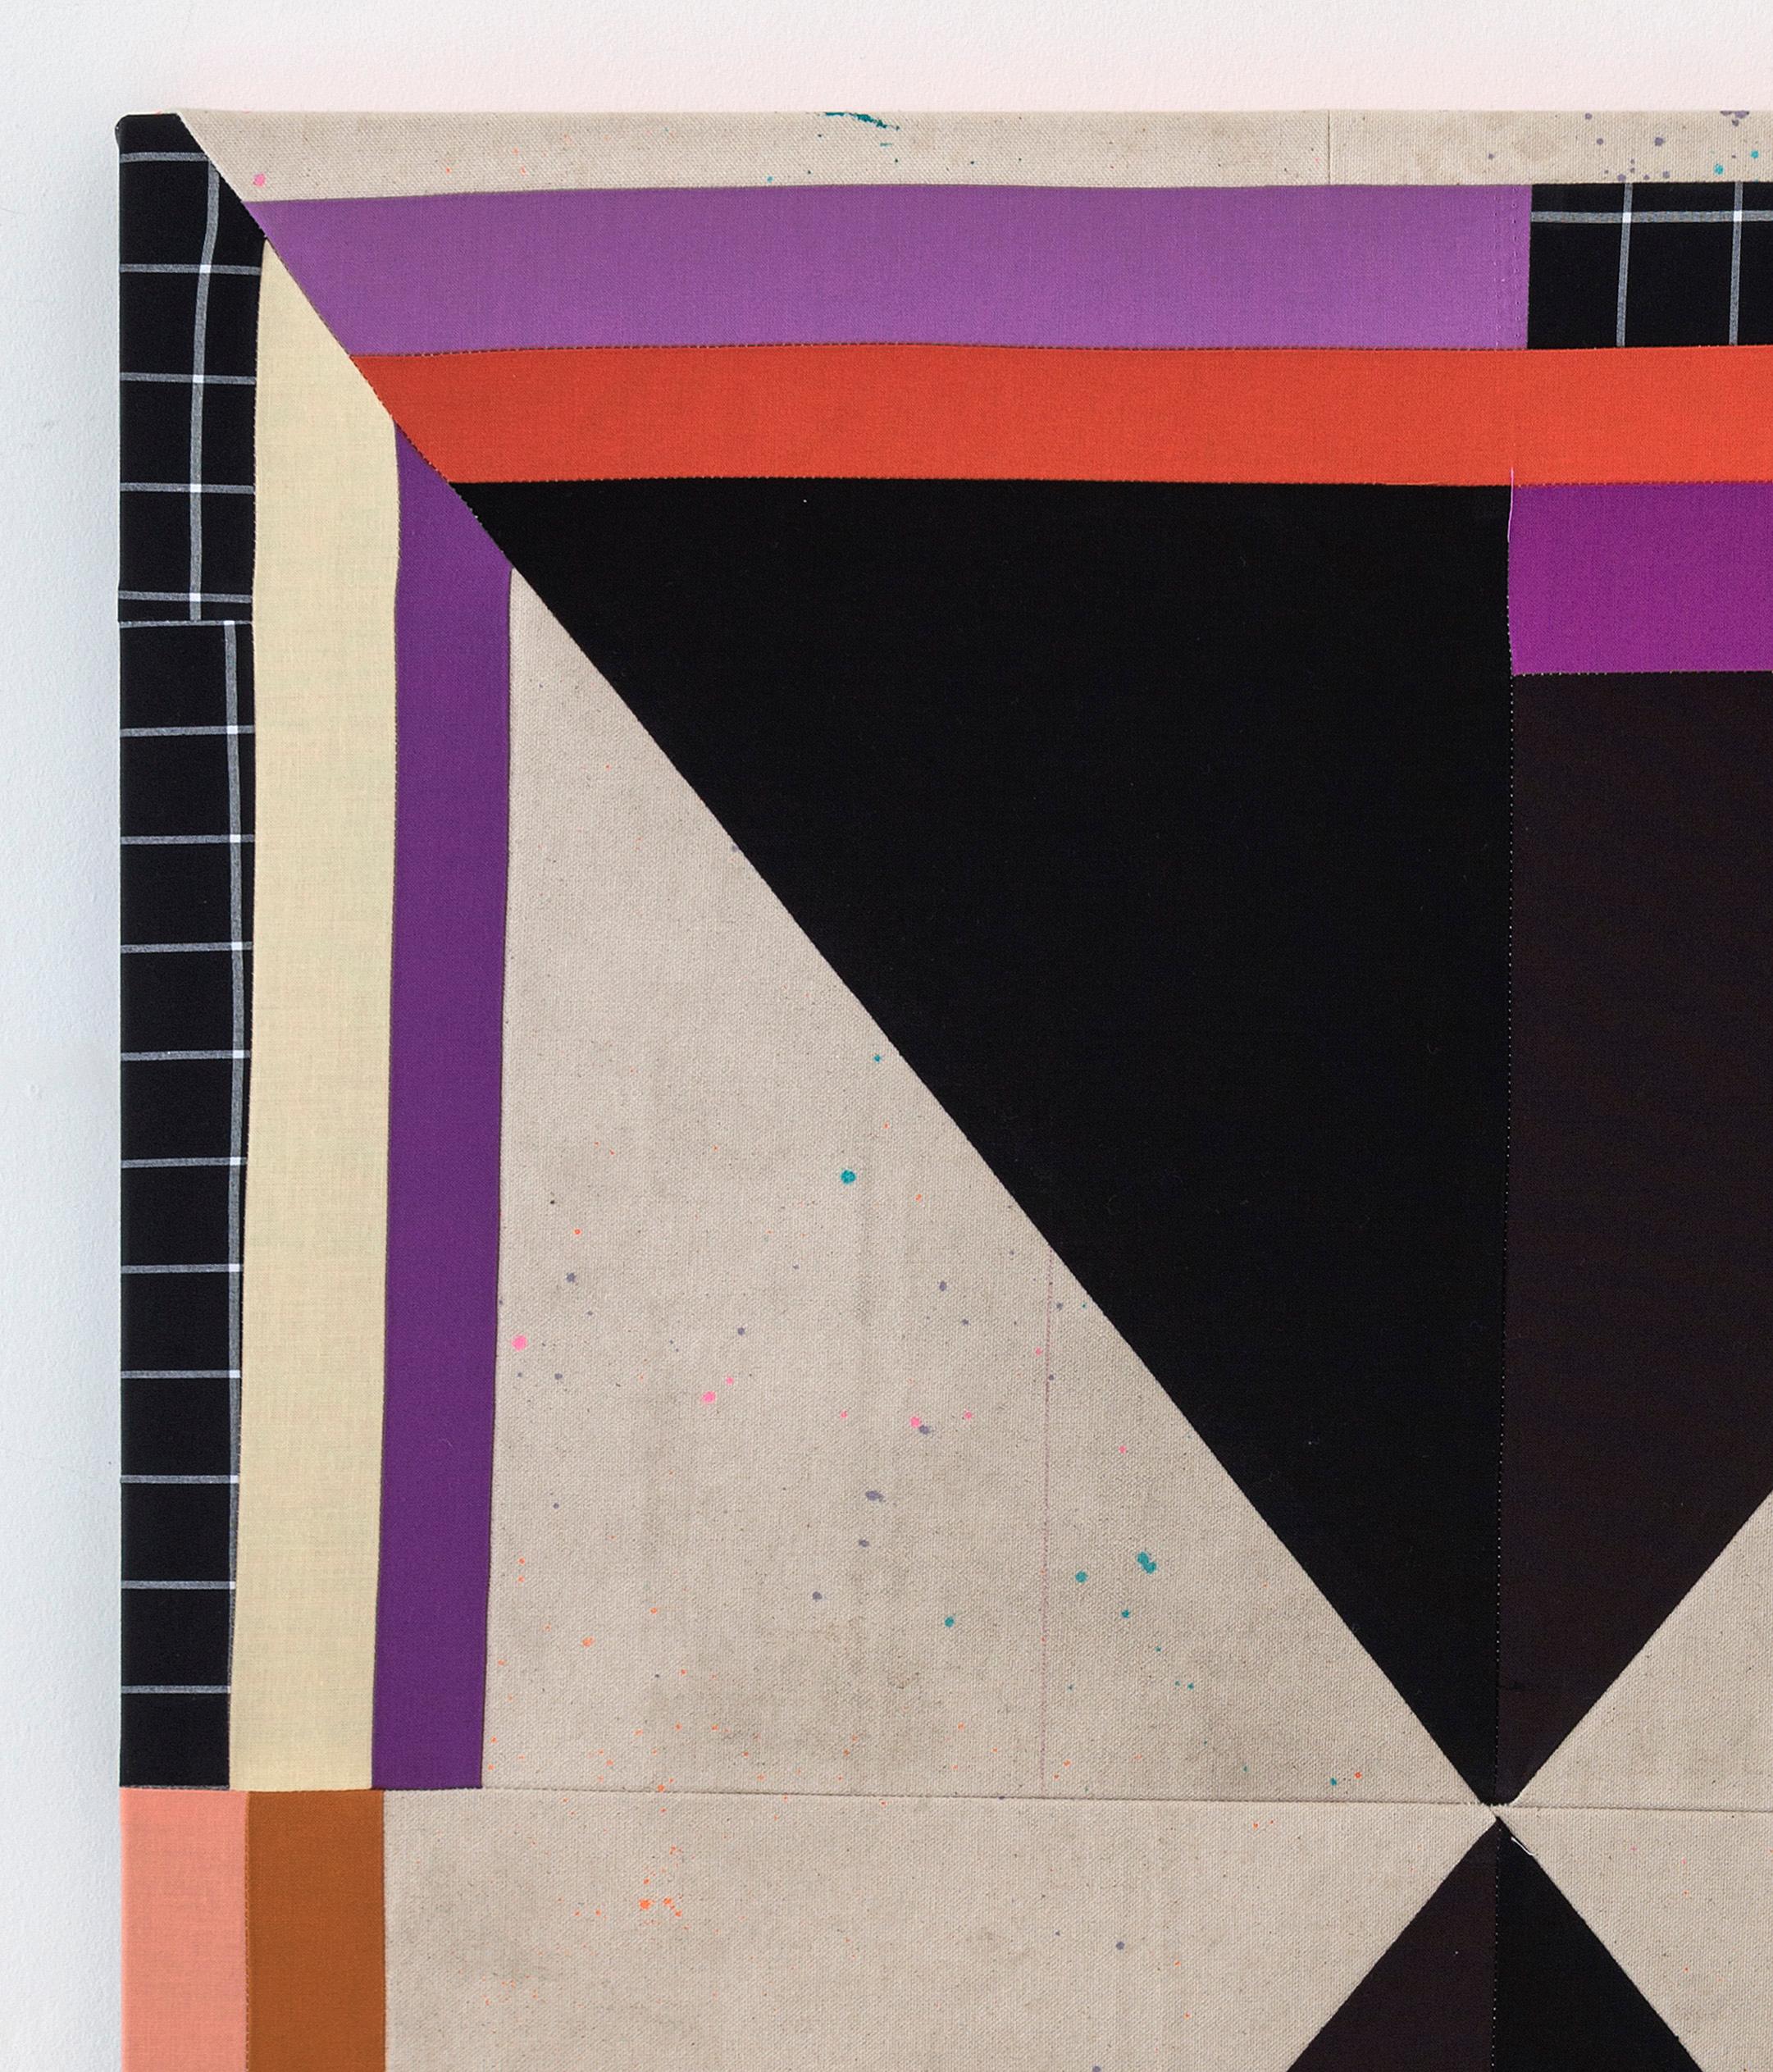 Our Hours - Abstract Geometric Painting by Paolo Arao